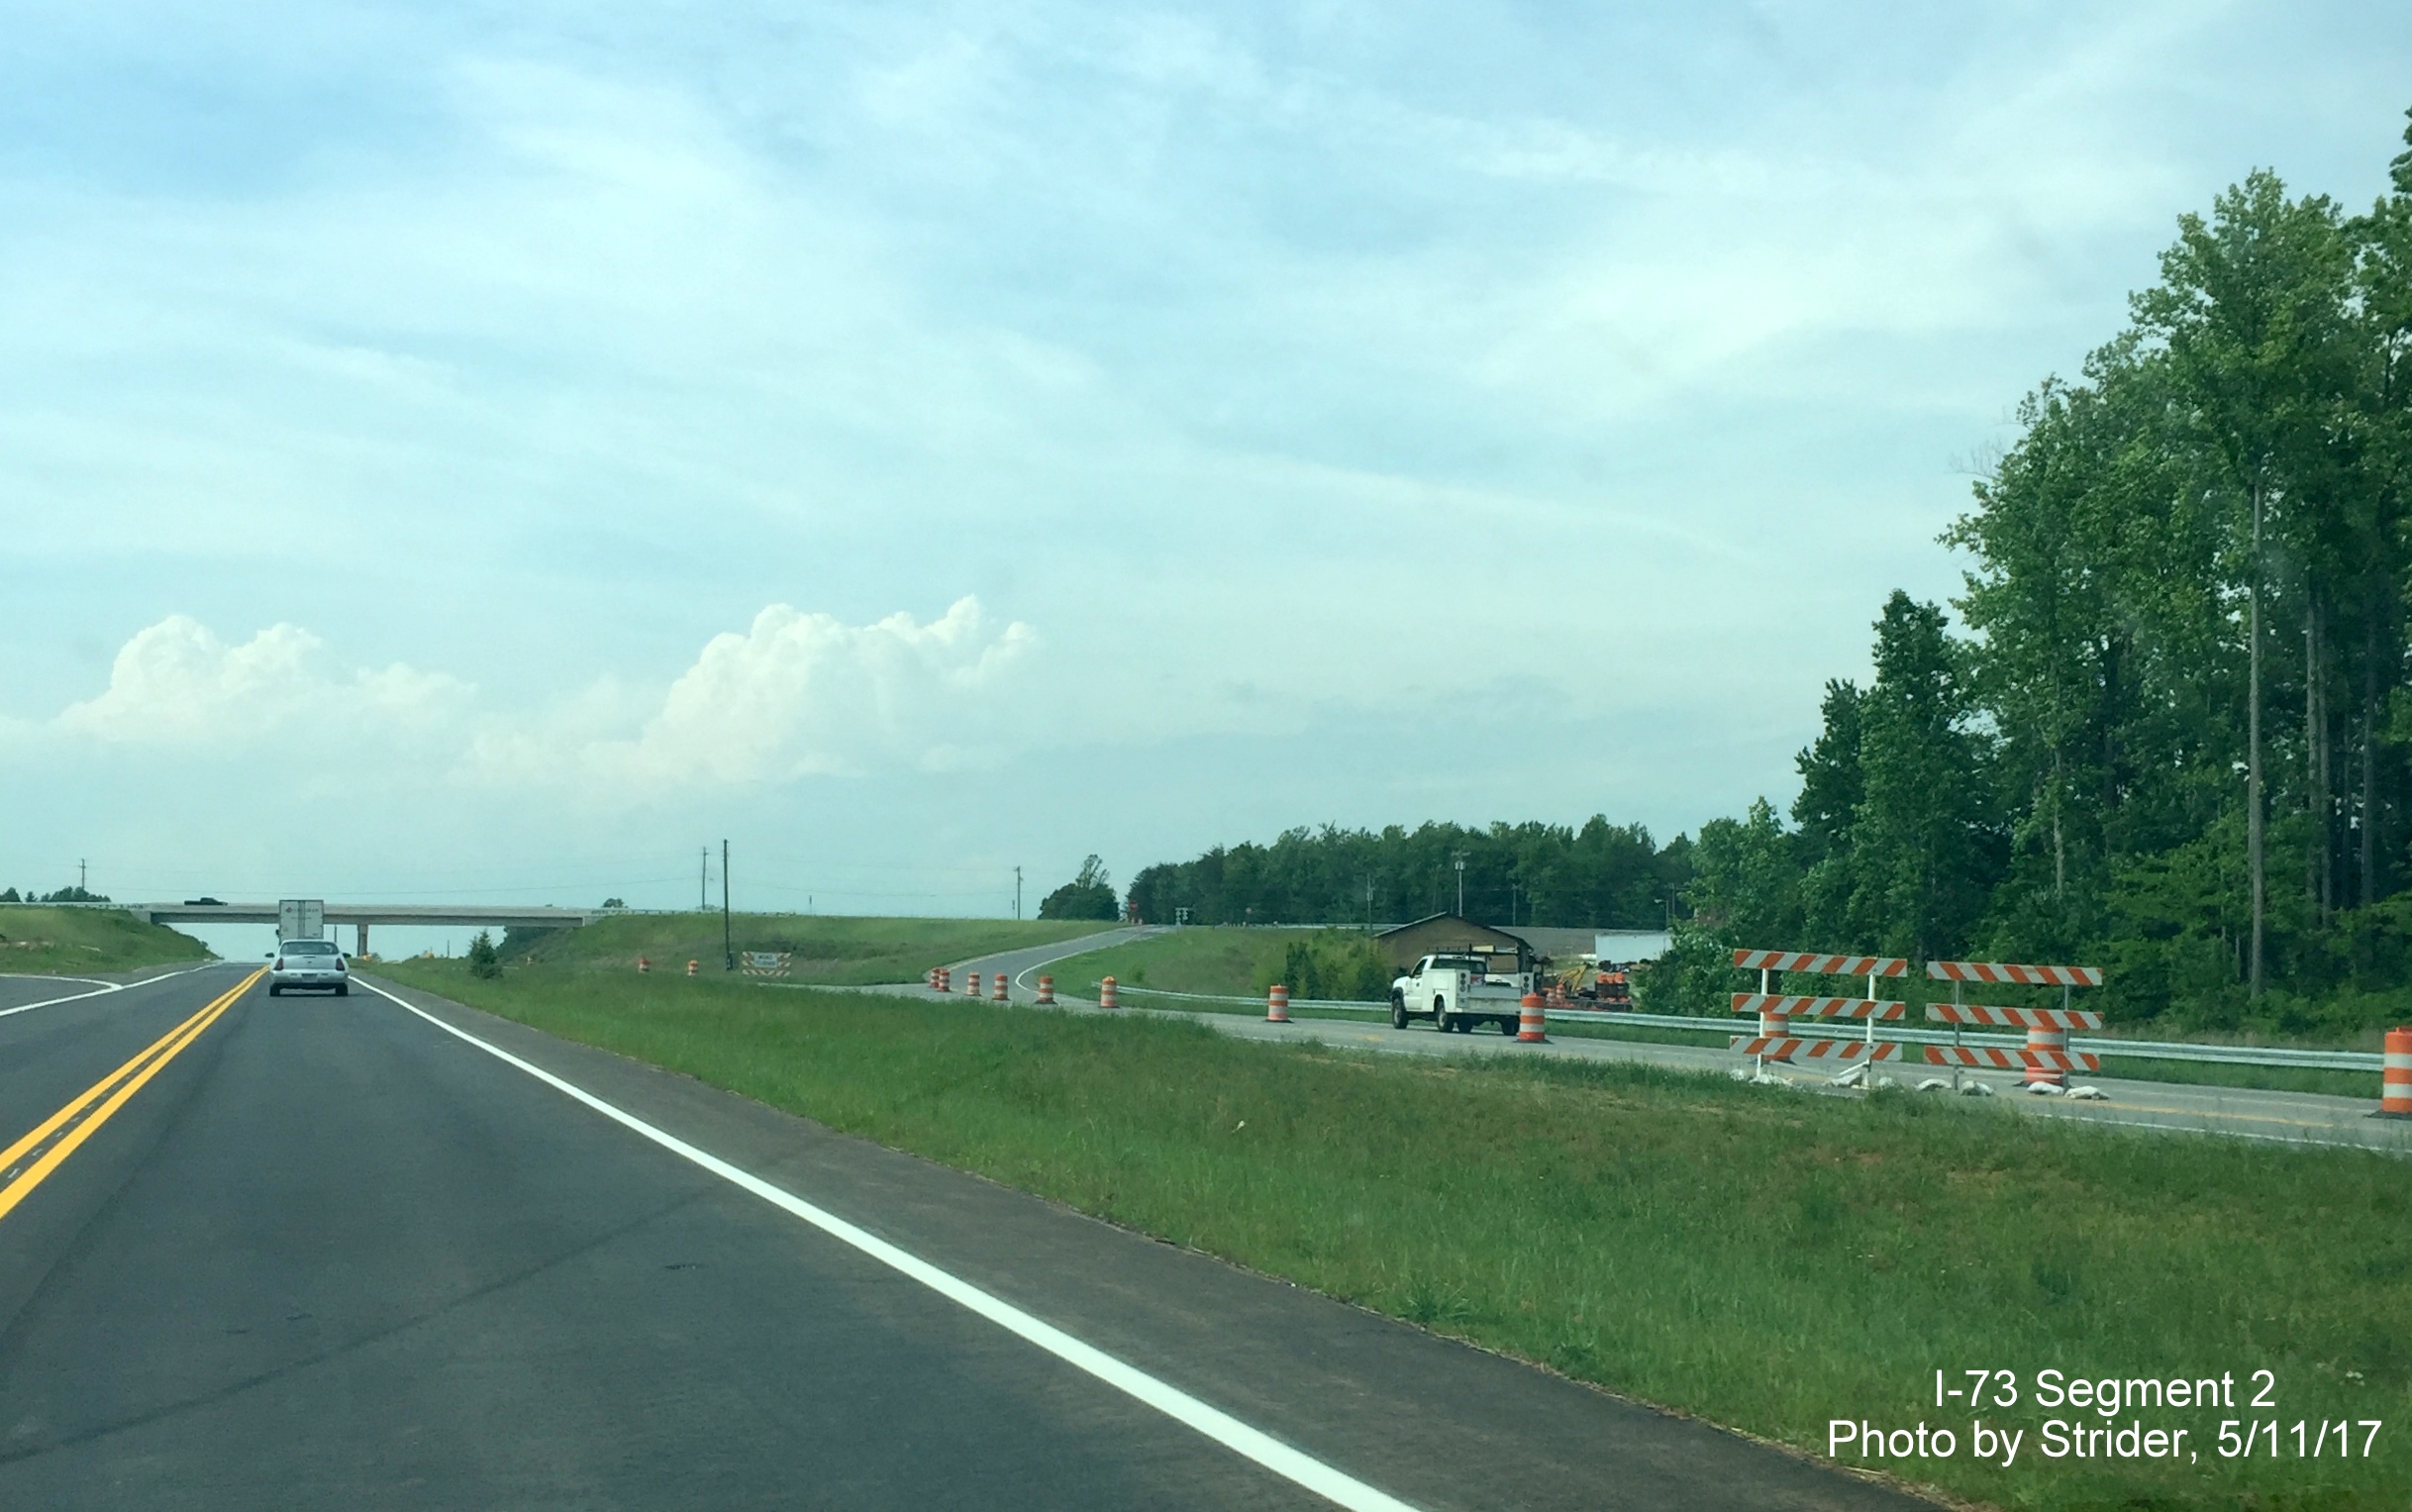 Image of recently opened off-ramp to NC 65 from US 220 North using Future I-73 South lanes, from Strider